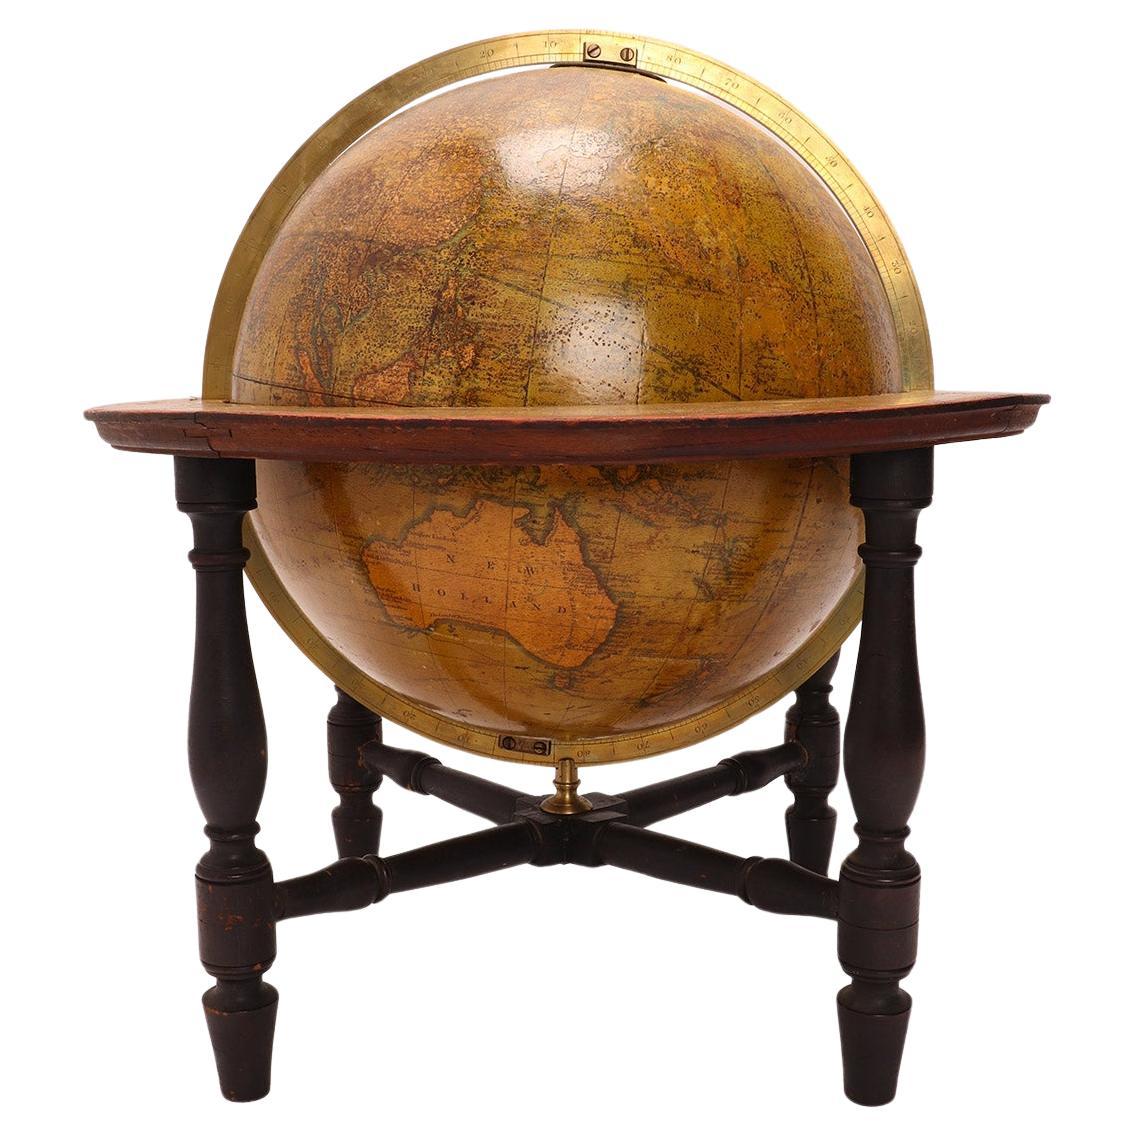 Rare 12 inches terrestrial globe signed Cary, London United Kingdom 1800. For Sale